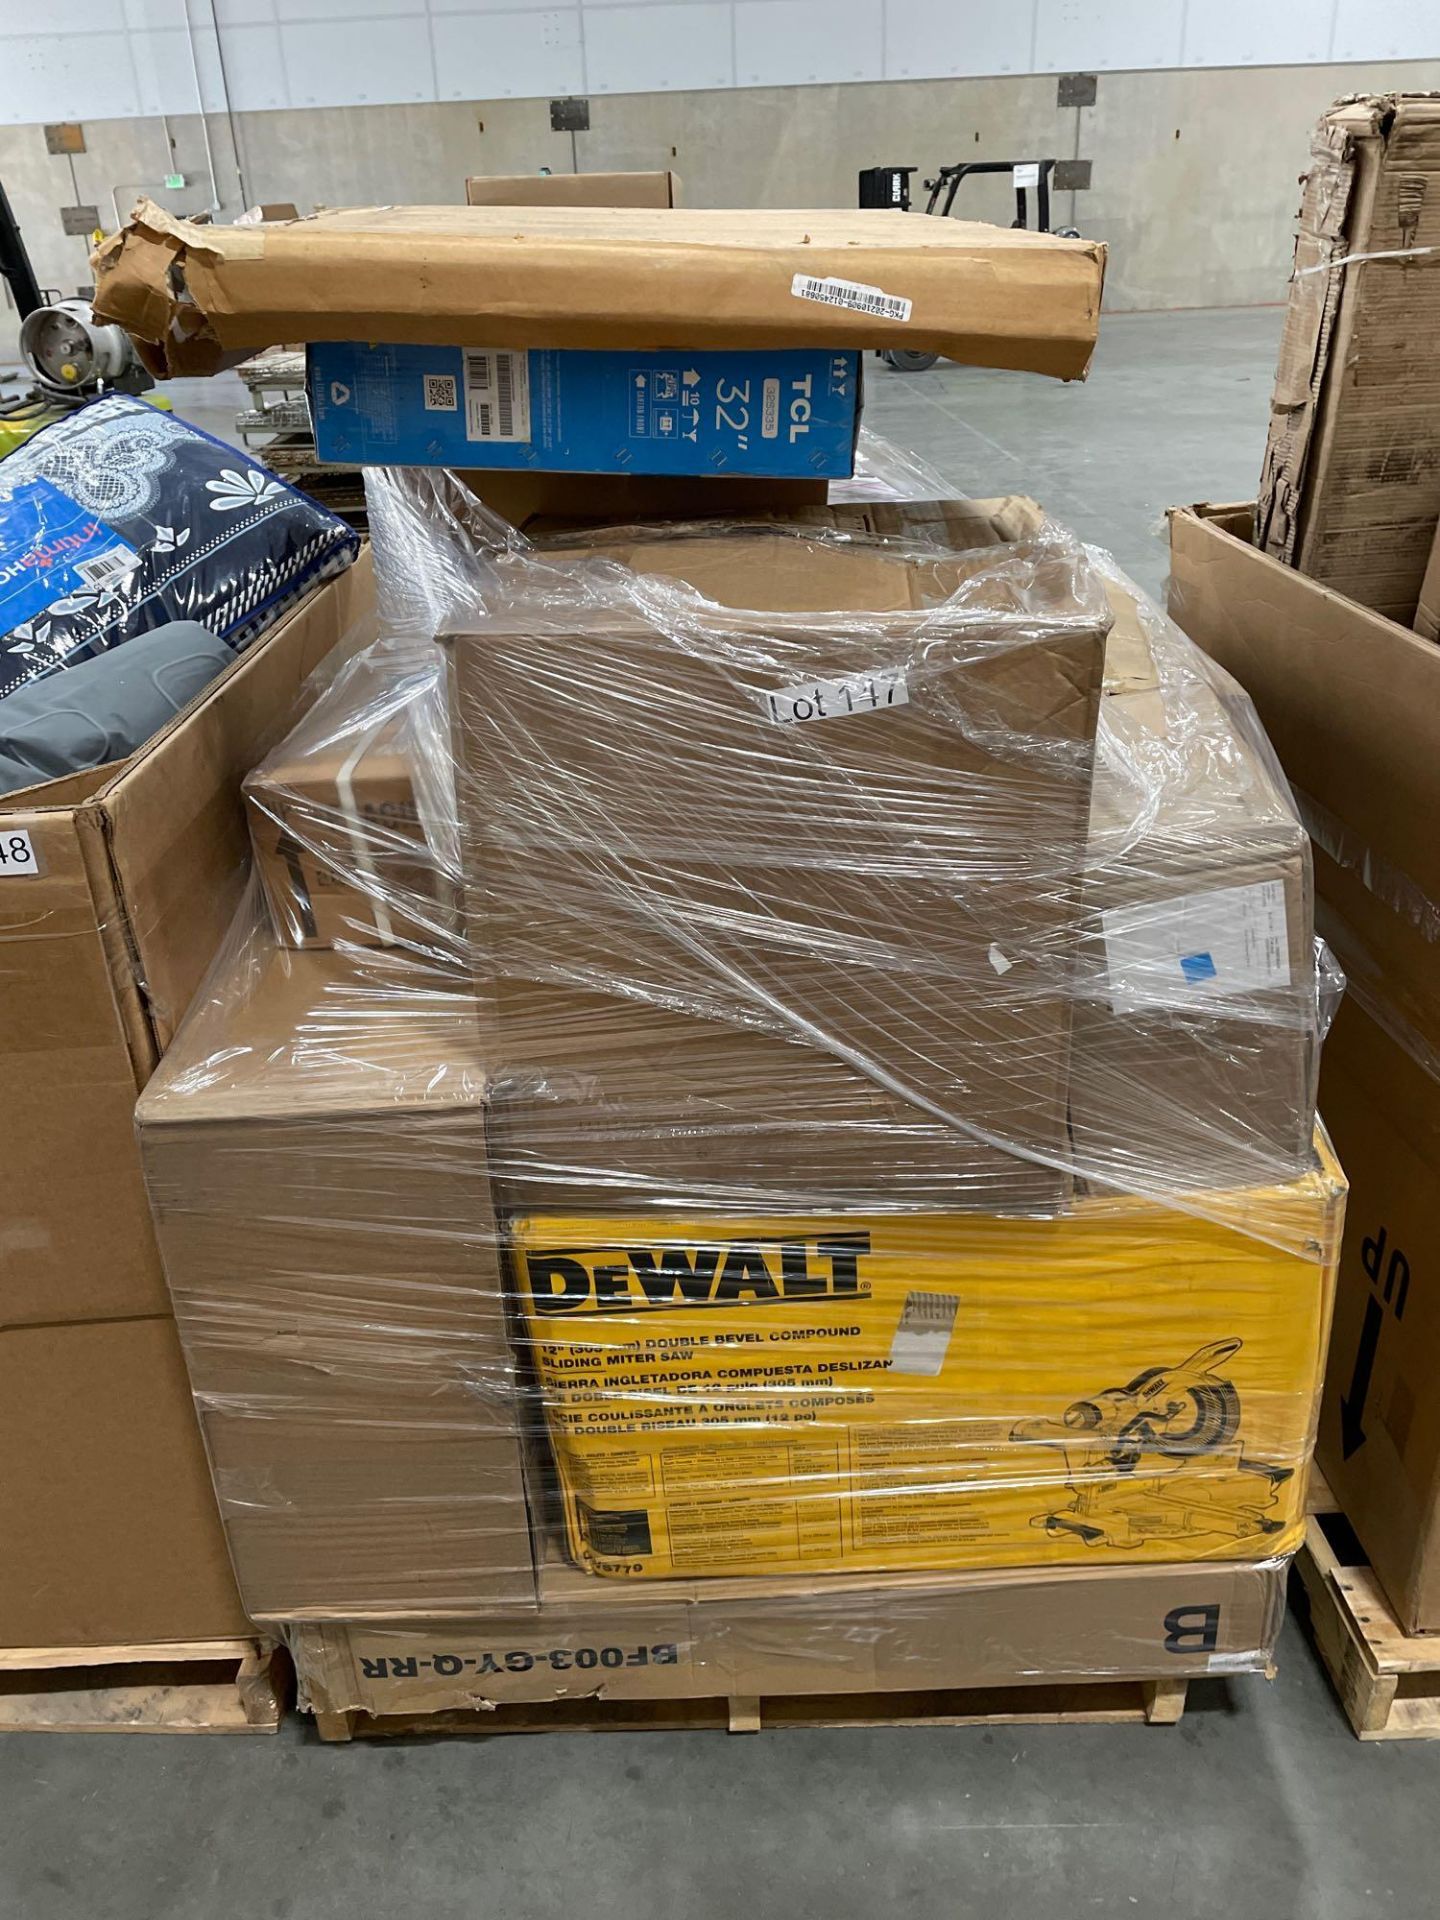 Dewalt Double Bevel compound miter saw, and more